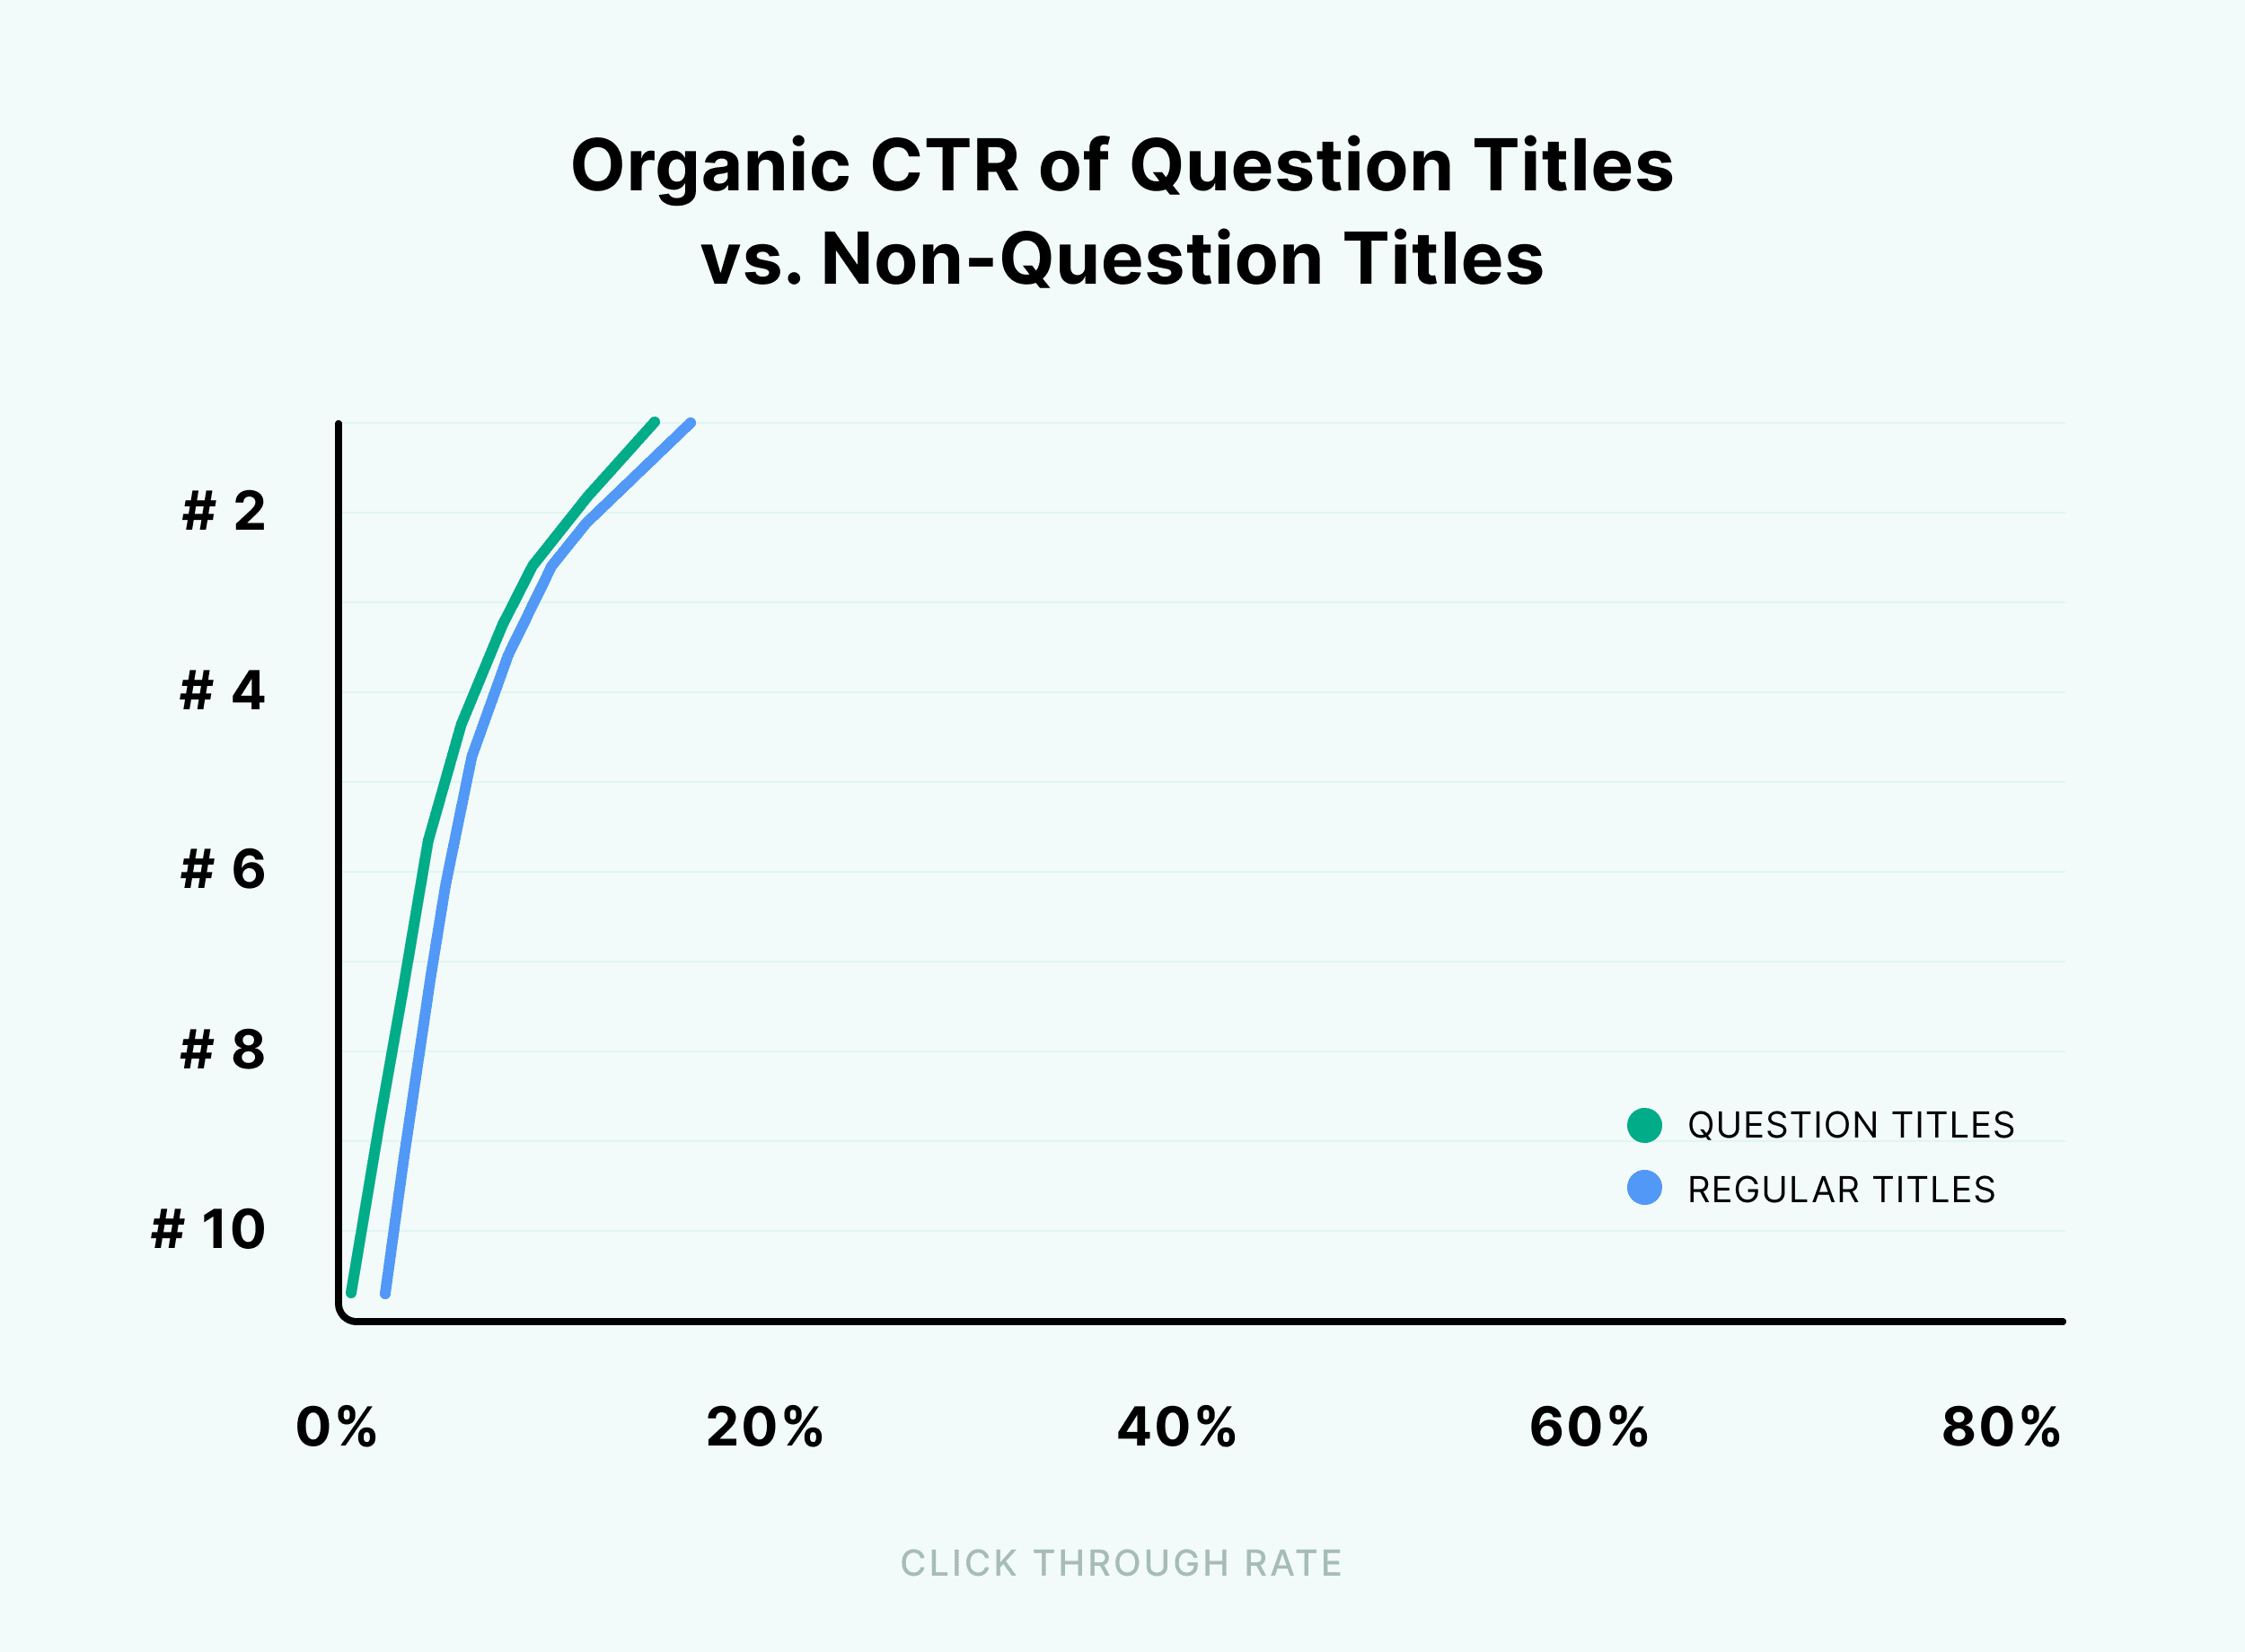 Organic CTR of question titles vs. non-question titles